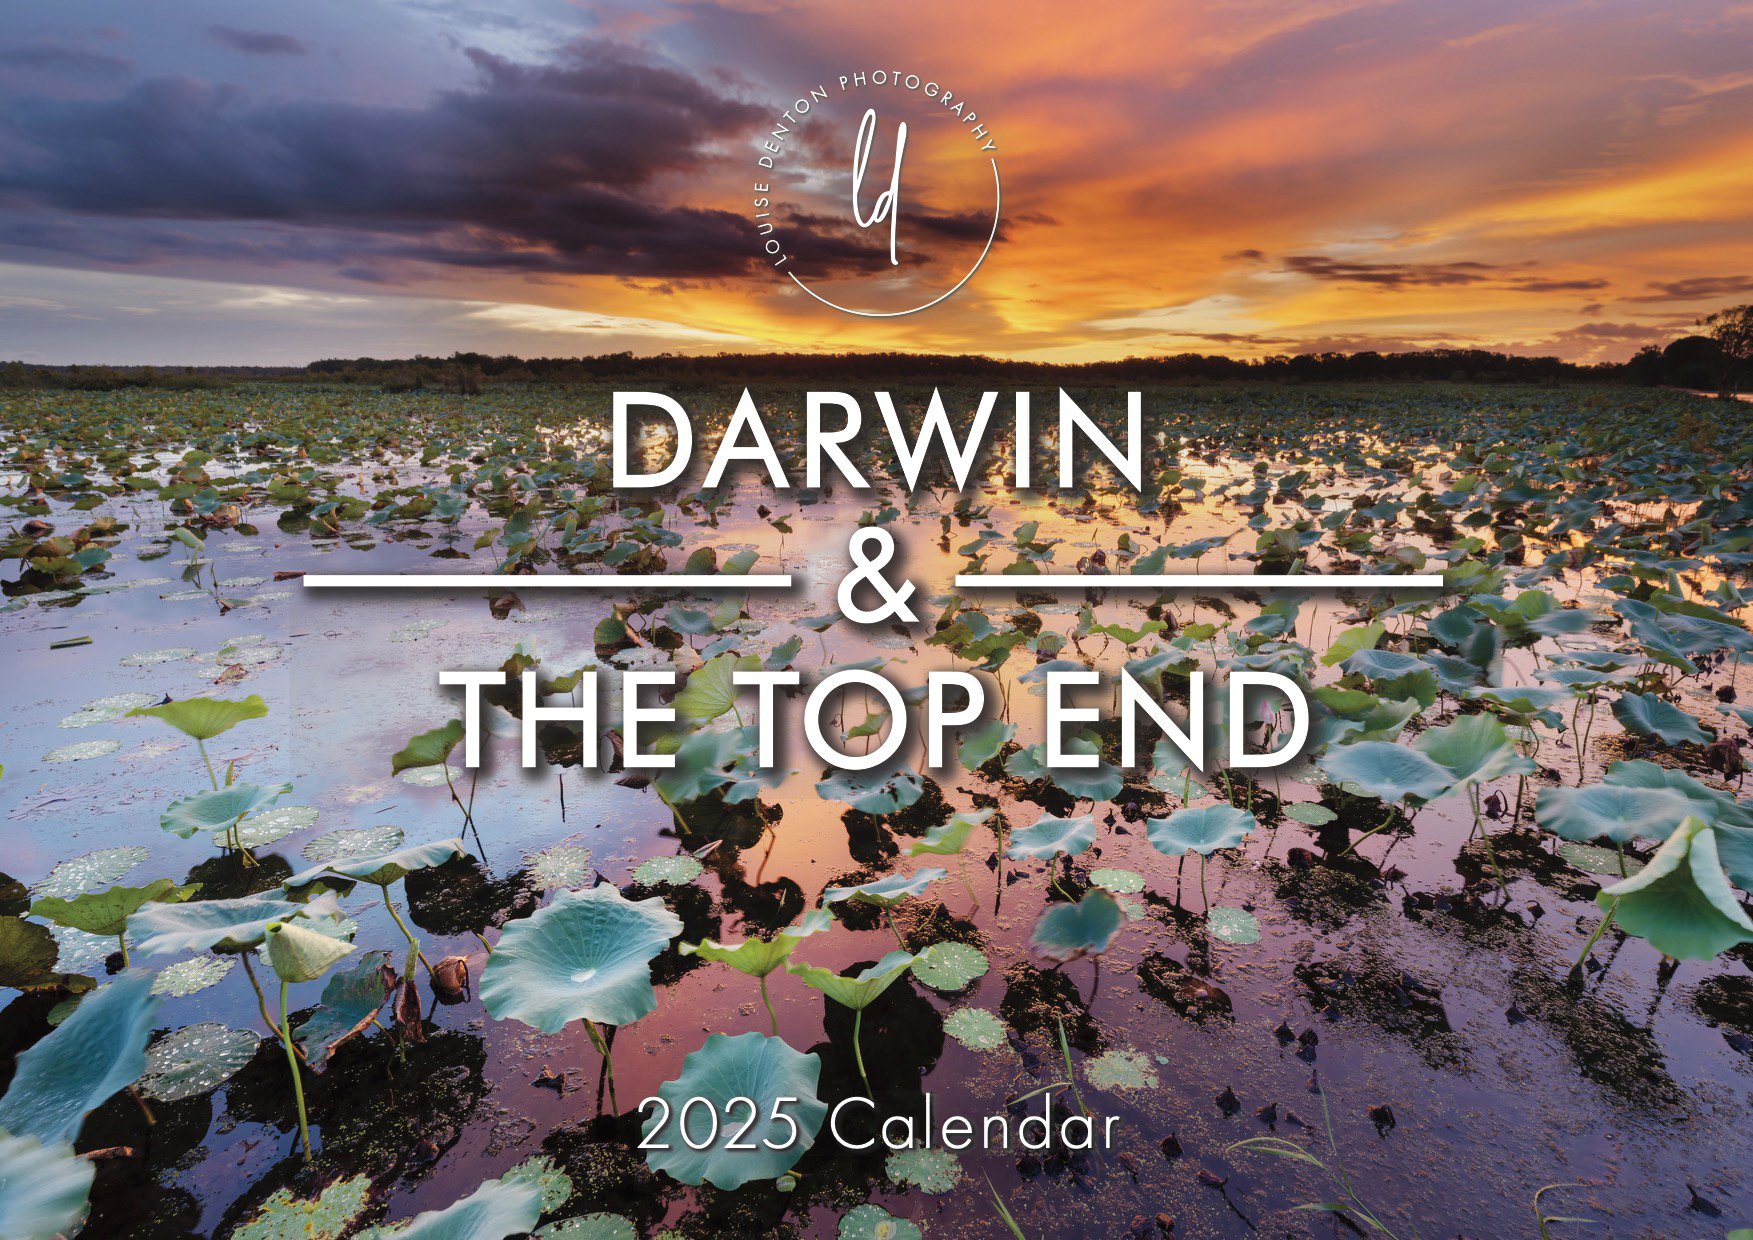 SNEAK PEEK AND EXCLUSIVE OFFER!

This might seem early..... but our popular 2025 wall calendars are printed and on the way to Darwin! 

We're launching another new product at the same time... you'll have to subscribe to my newsletter for the full run